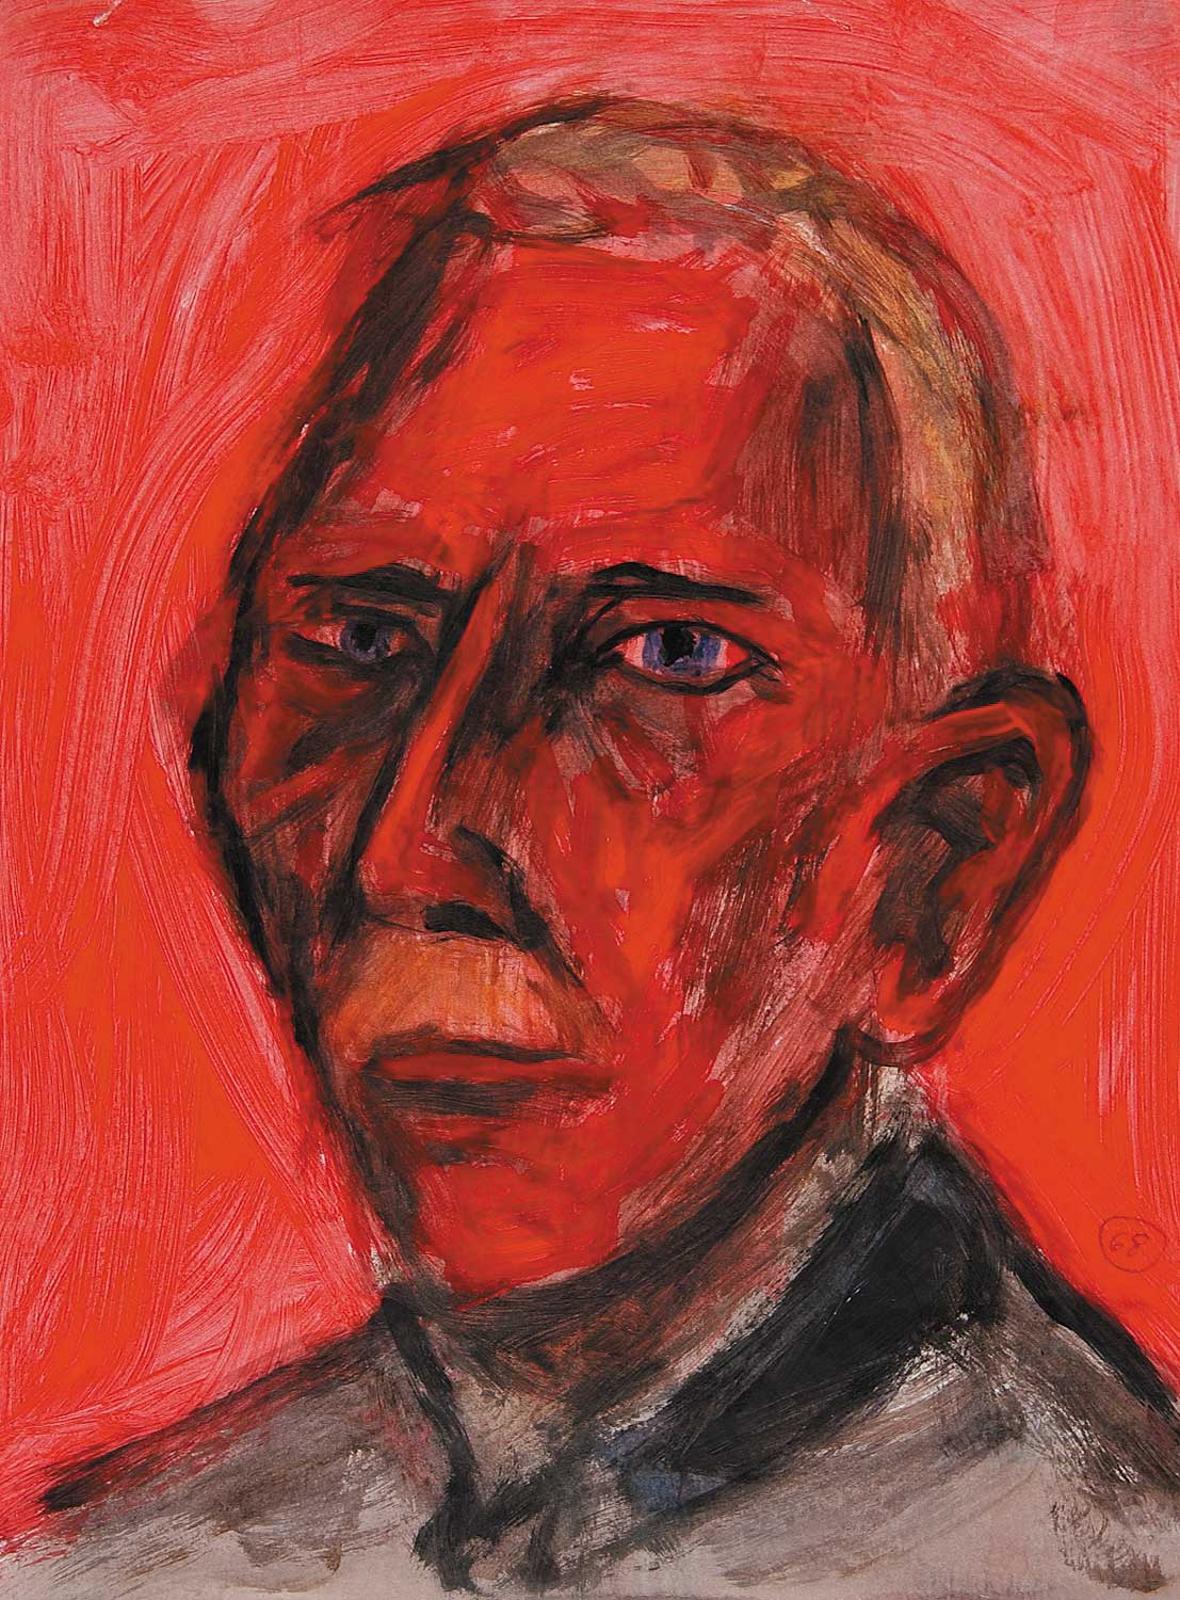 Robert Charles Aller (1922-2008) - Untitled - Old Man with Blue Eyes on Red Background